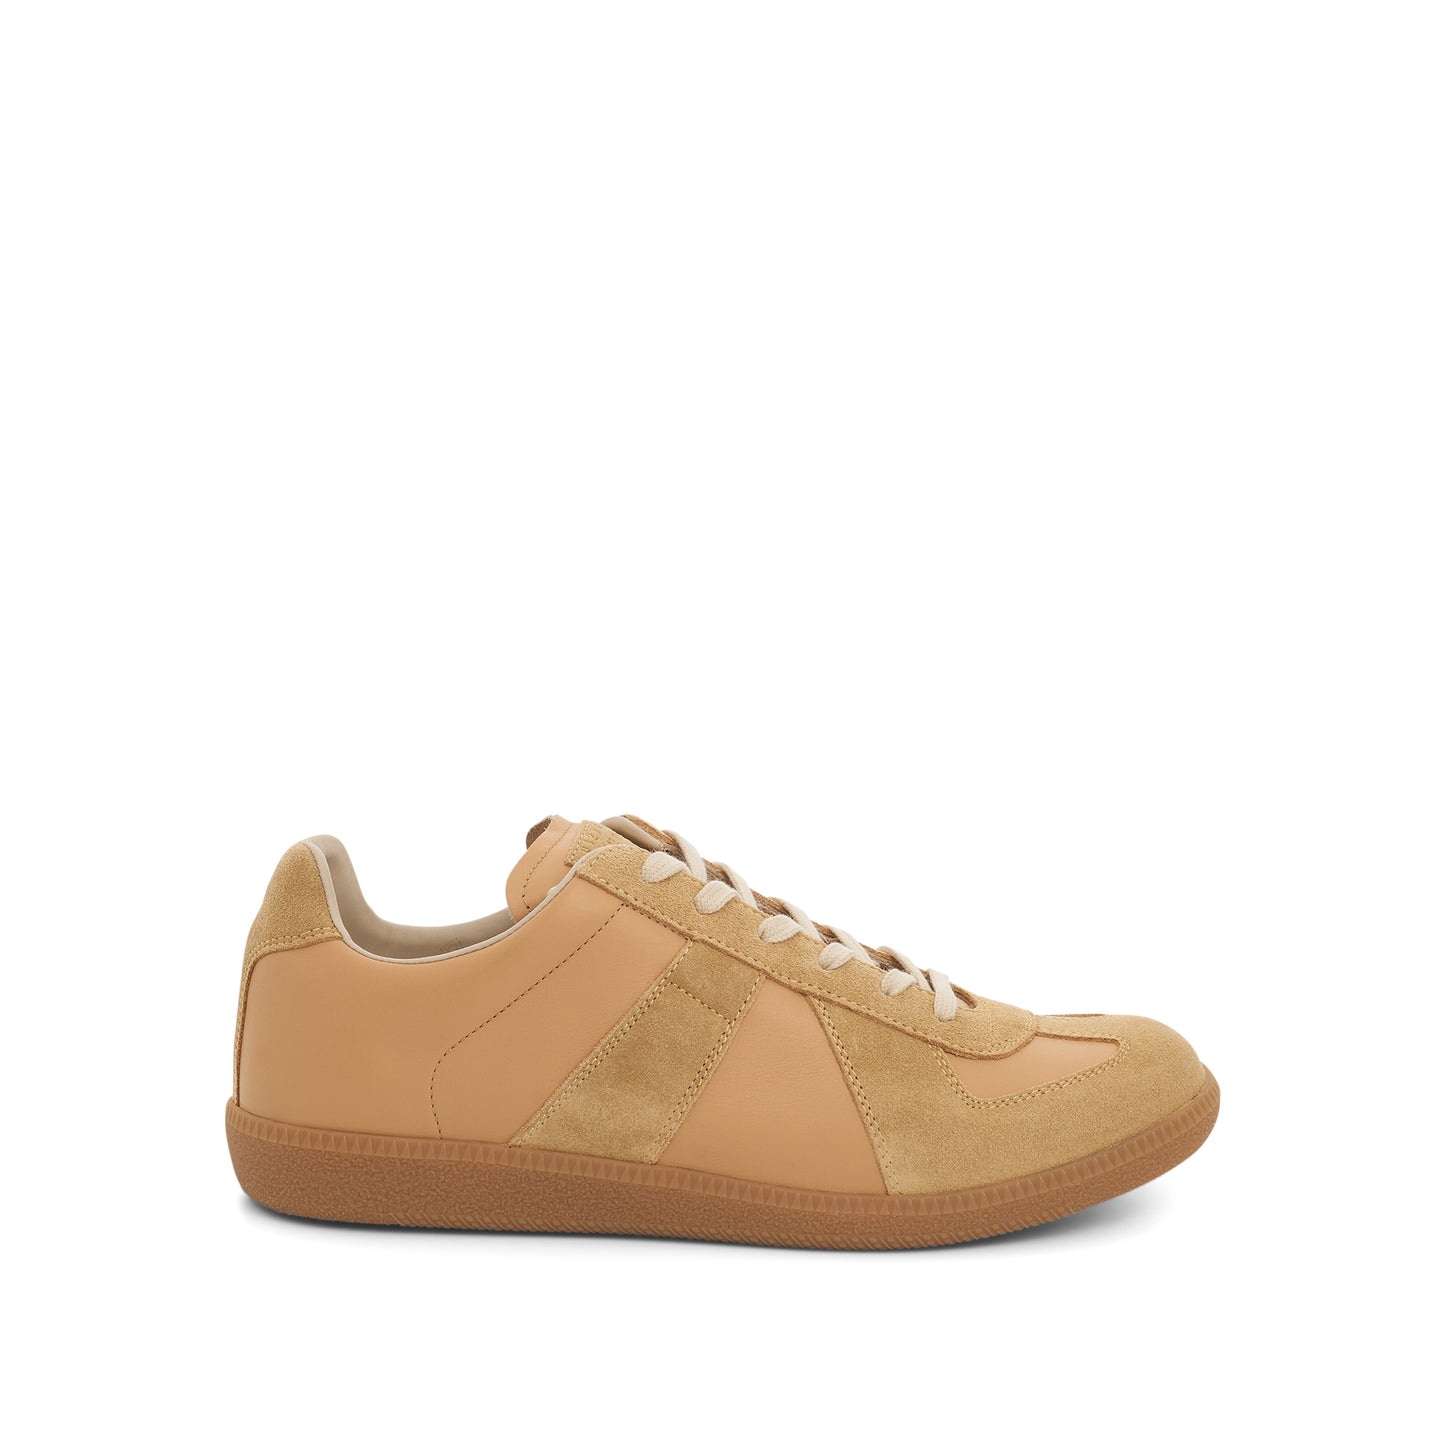 Replica Leather Sneakers in Champagne